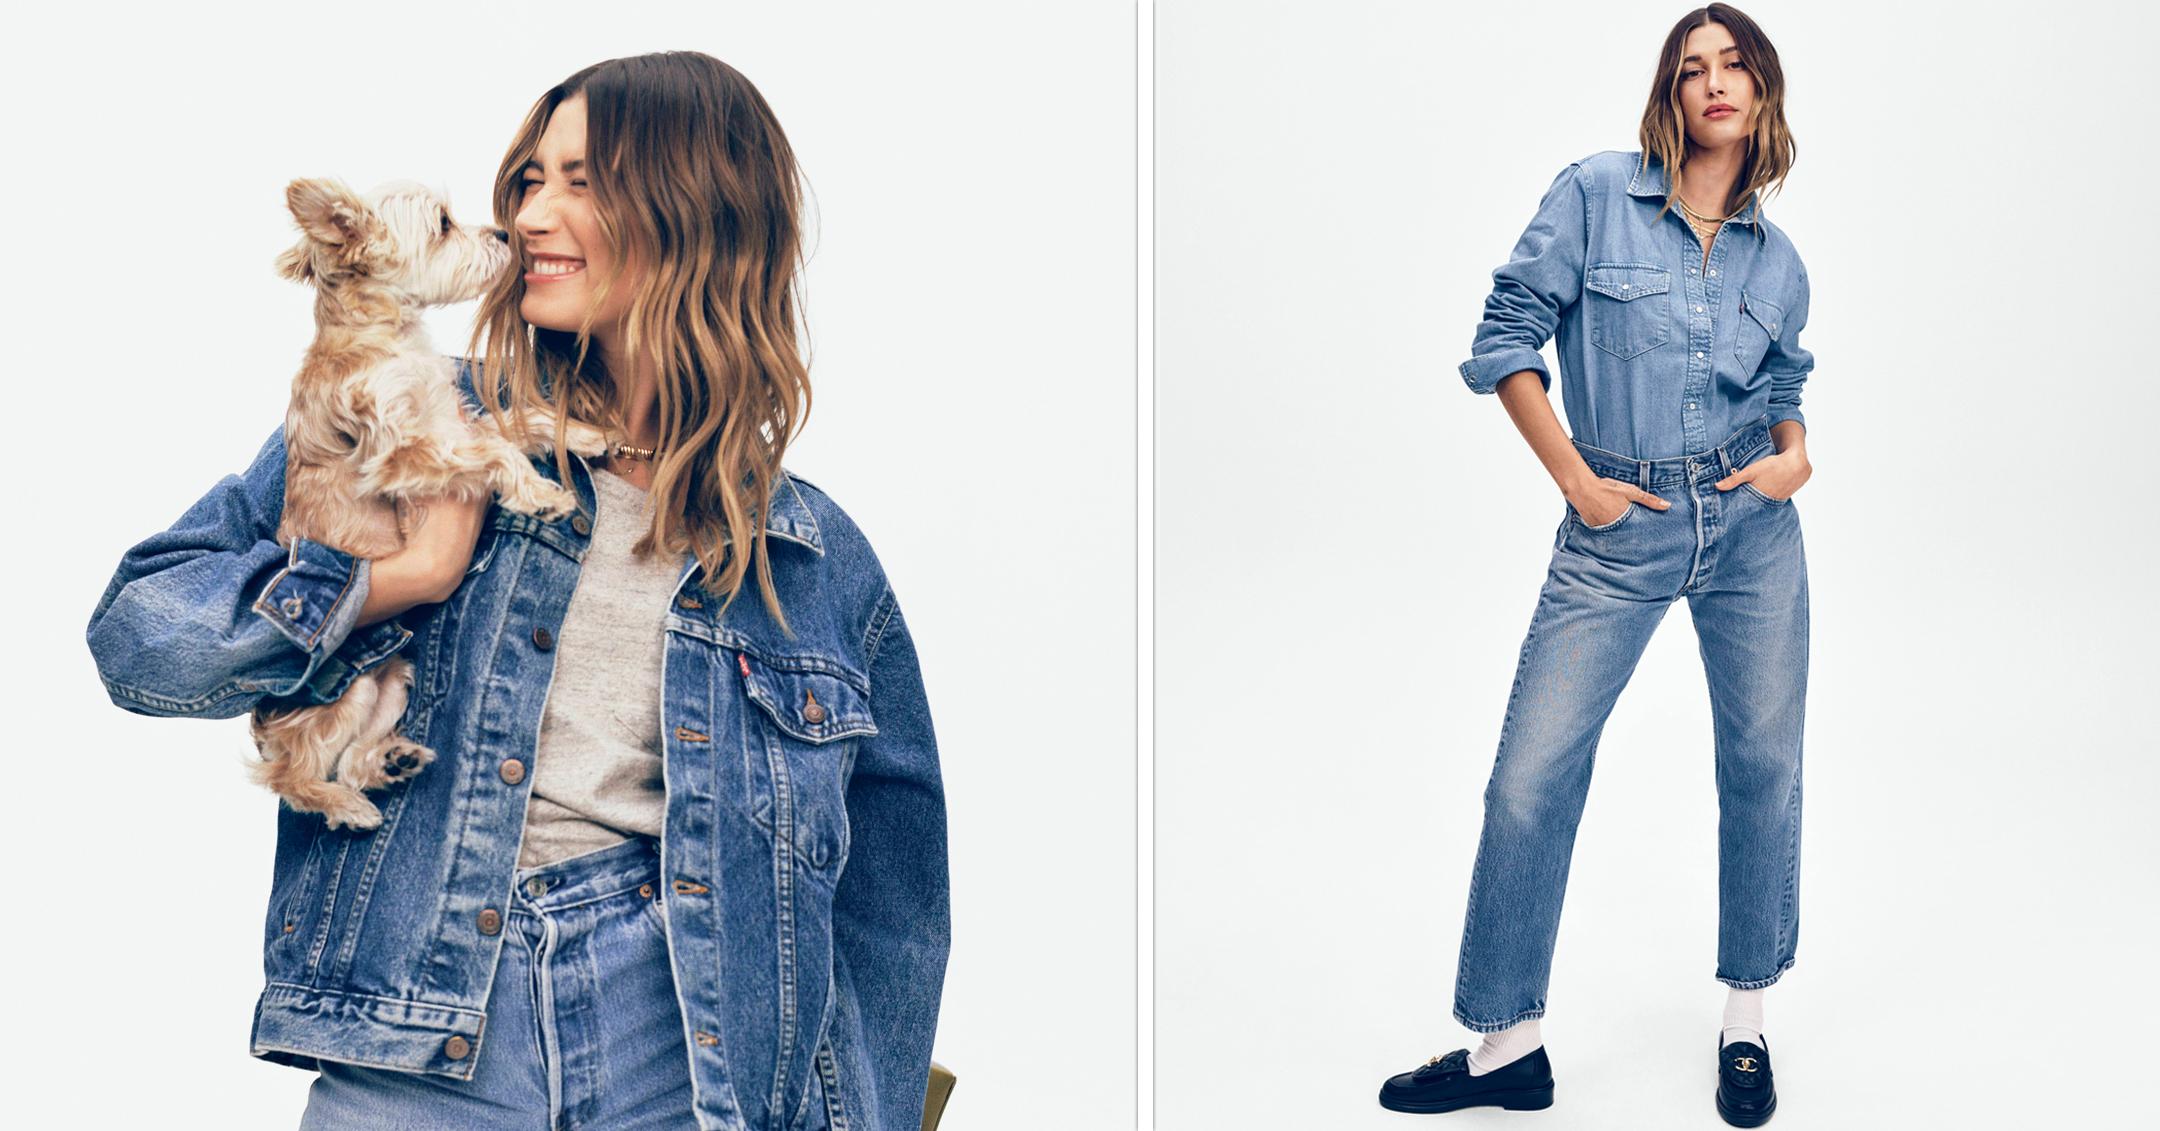 Model Hailey Baldwin Wears Levi's In New Campaign: Photos